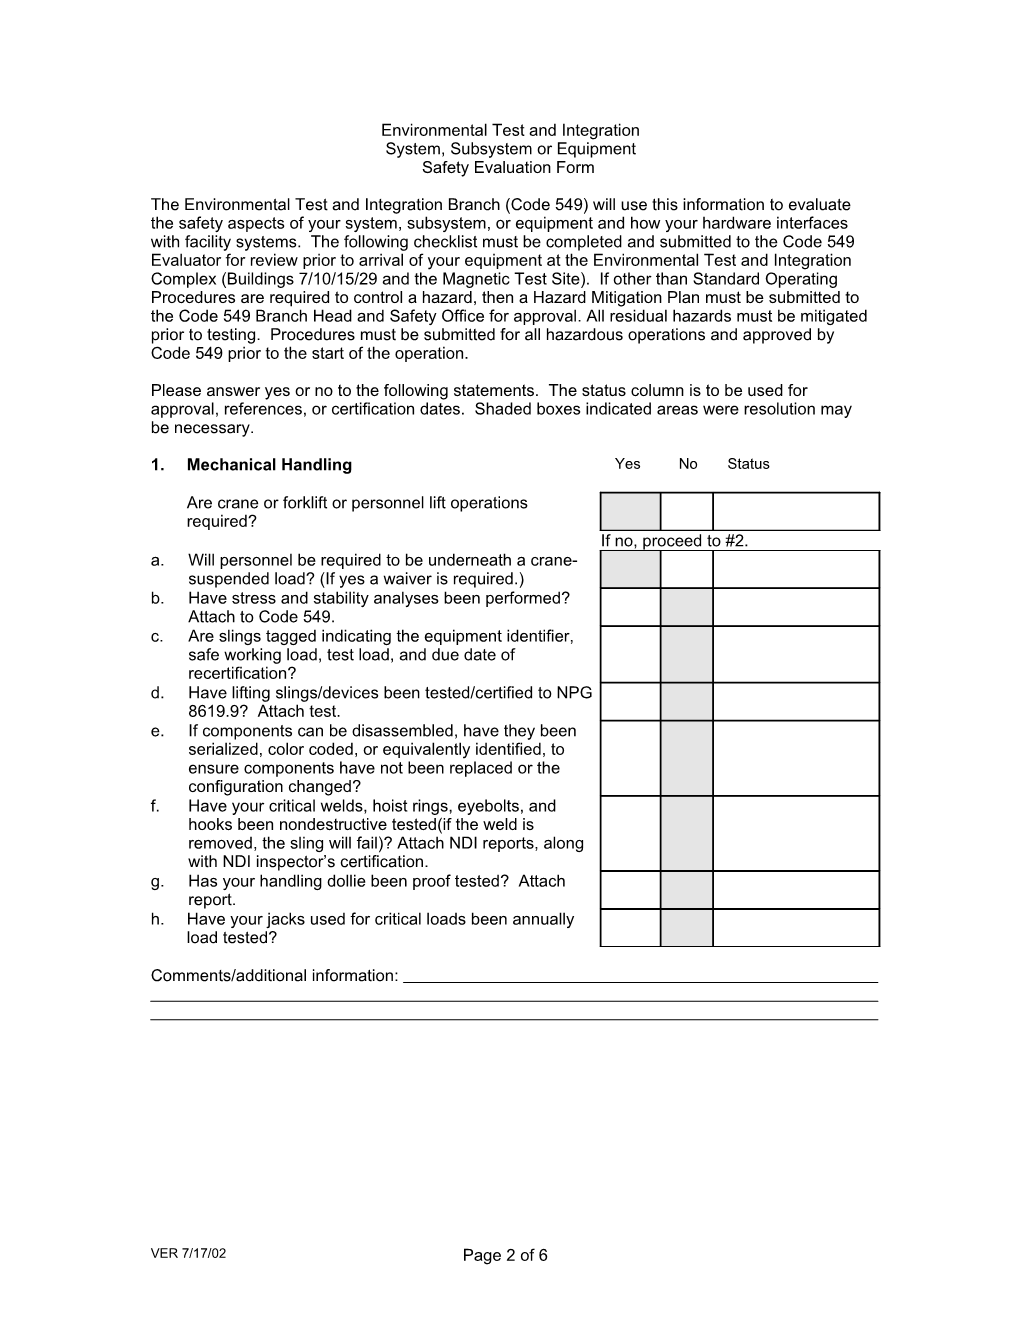 Code 750 Evaluation Form of Test Articles